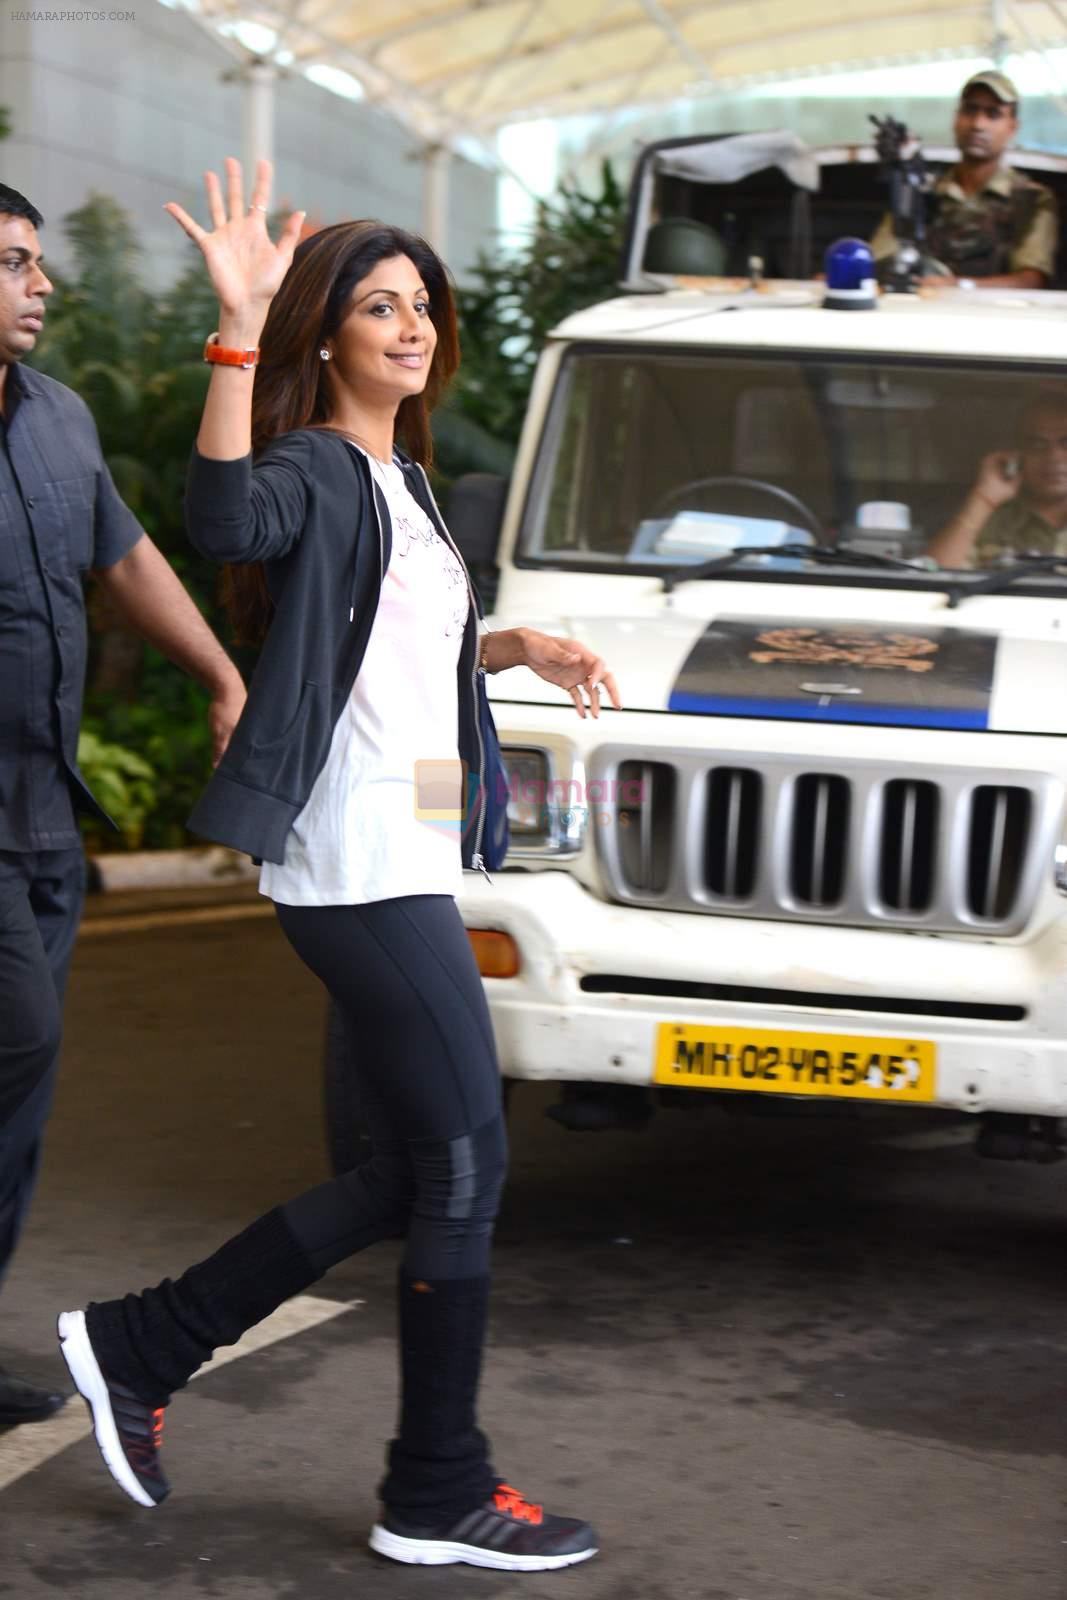 Shilpa Shetty snapped at airport as she returns from Bangalore in Domestic Airport on 21st June 2015